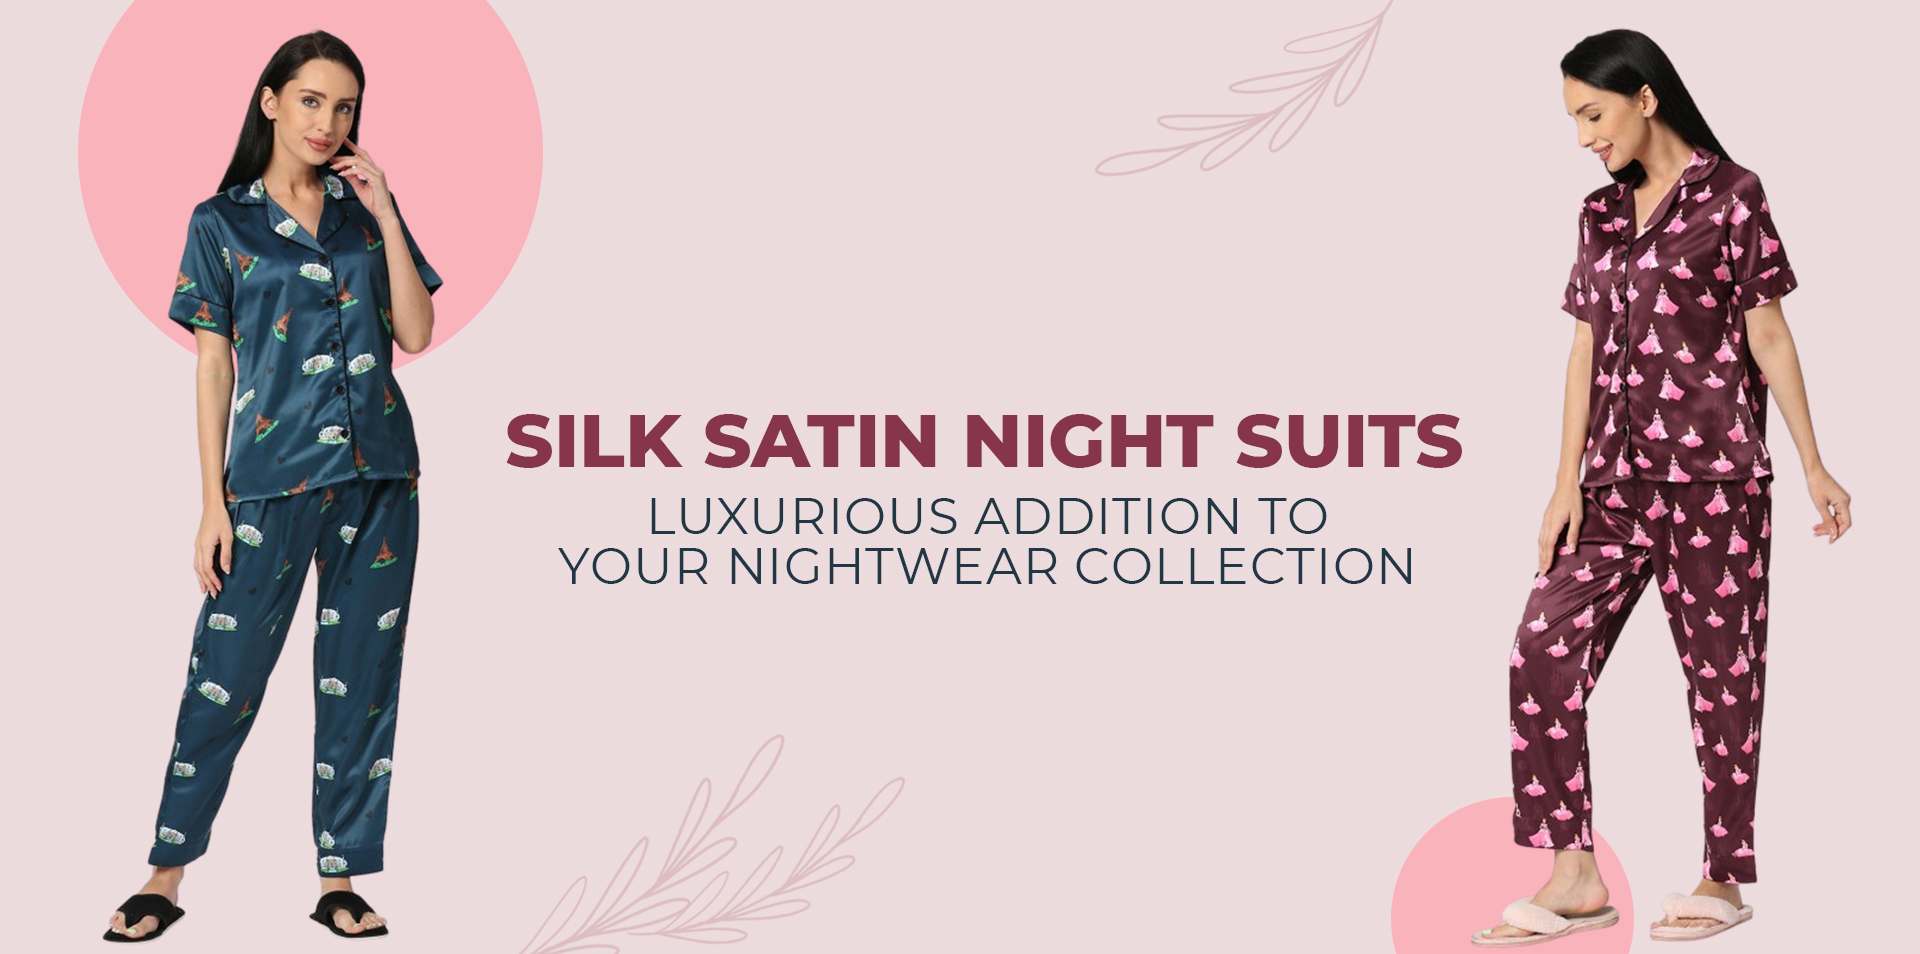 5 Silk Satin Night Suits Addition to Your Nightwear Collections | SMarty Pants